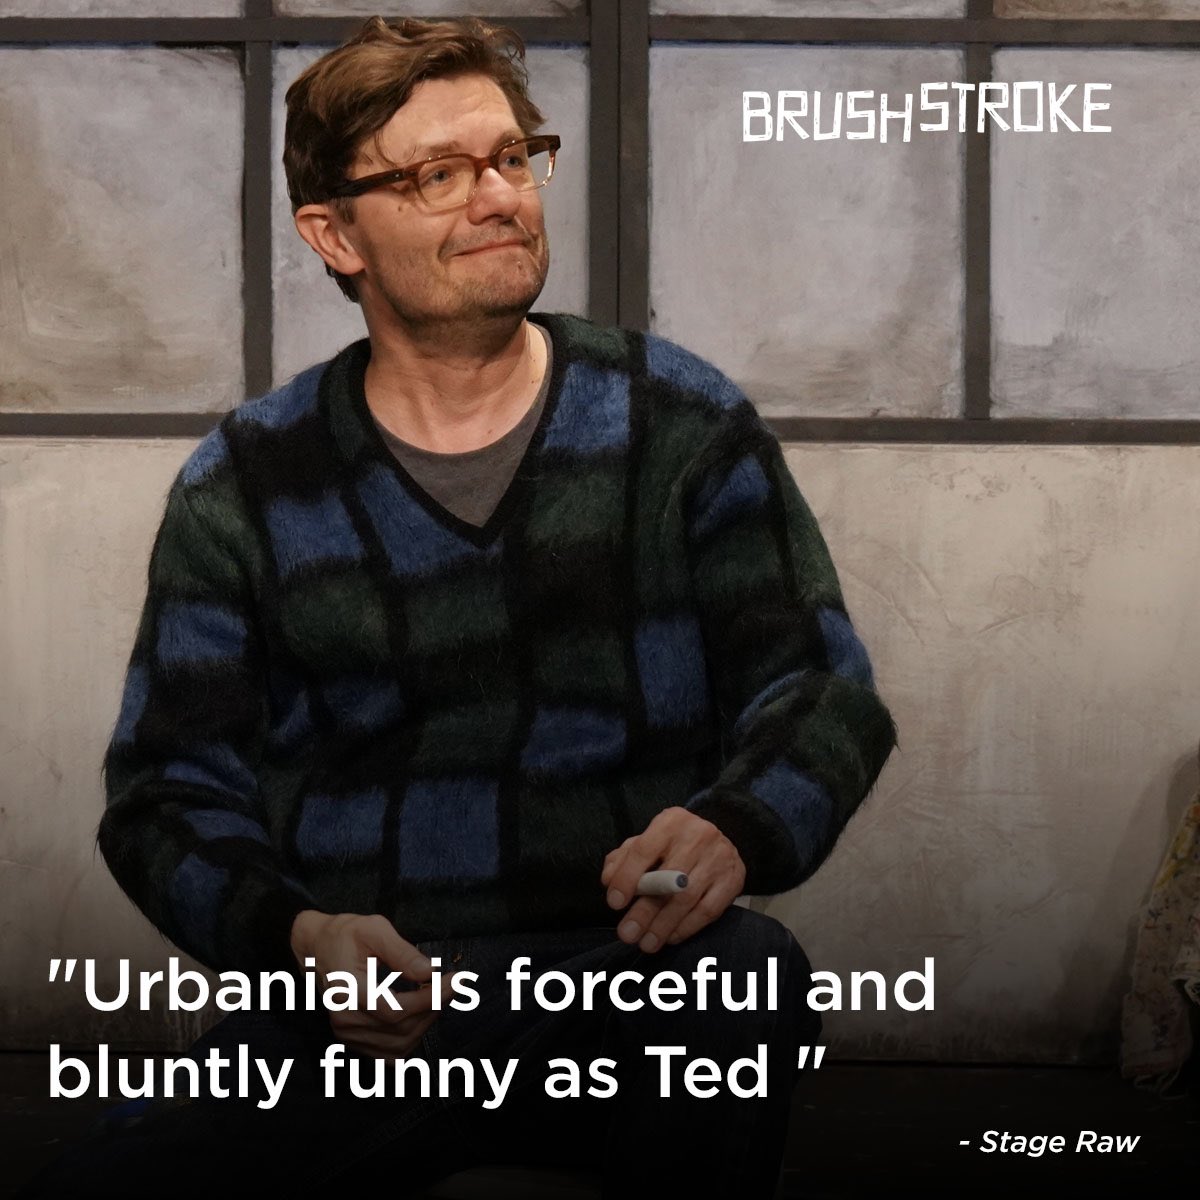 Don’t miss star of #Oppenheimer and #TheVentureBros @JamesUrbaniak live onstage in Los Angeles in BRUSHSTROKE. Now until March 3rd! Tickets: Tinyurl.com/BrushstrokeInLA